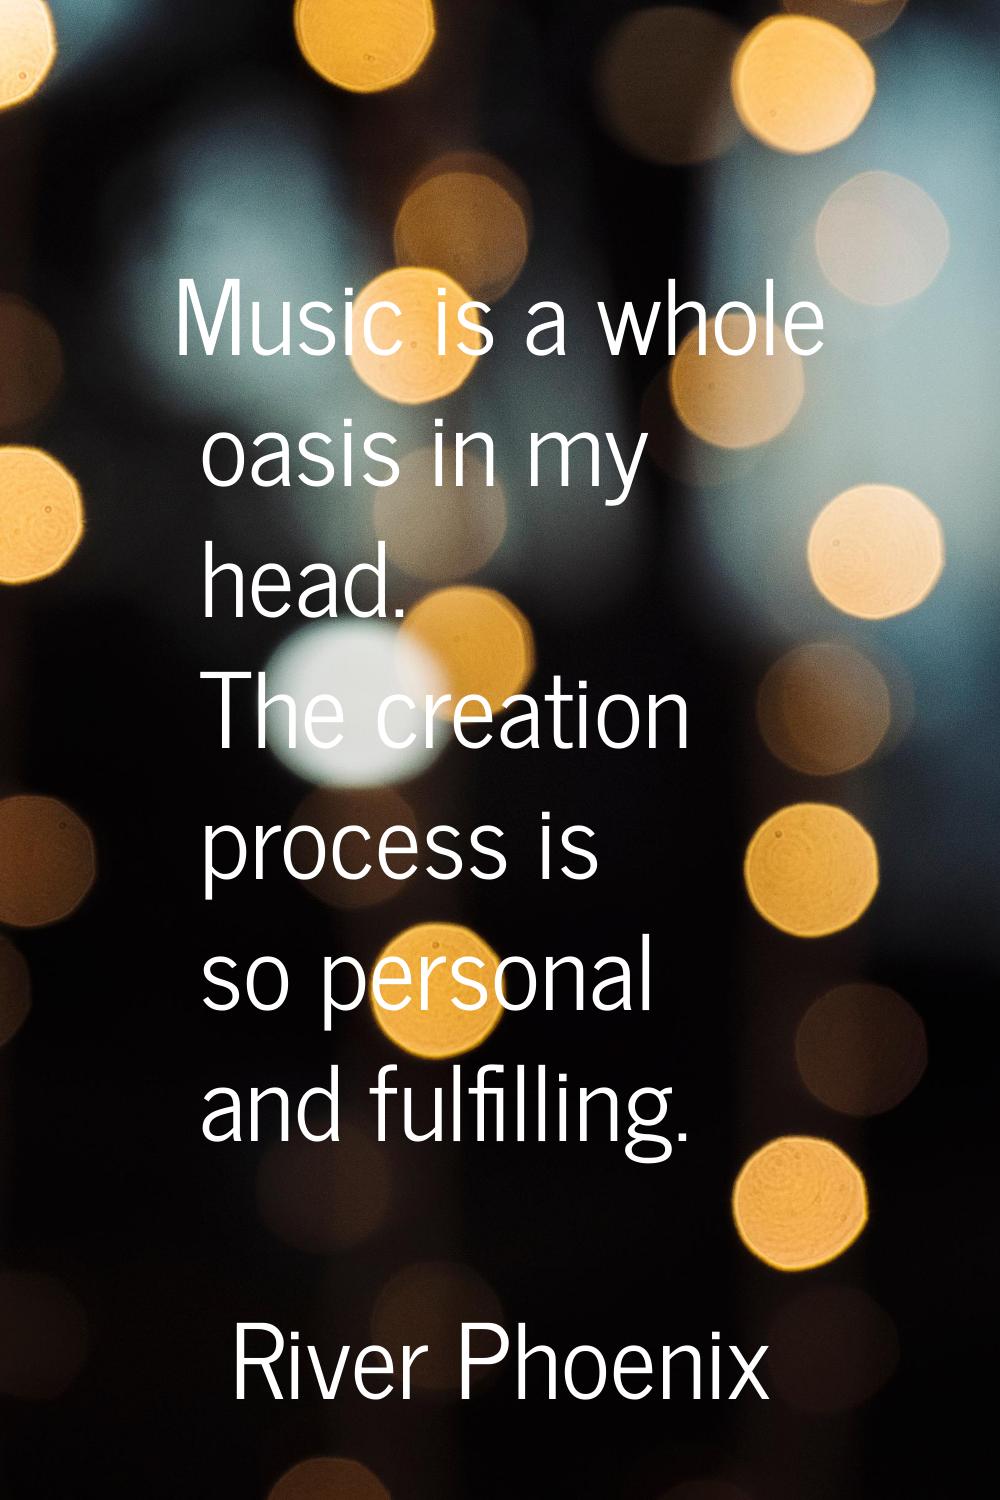 Music is a whole oasis in my head. The creation process is so personal and fulfilling.